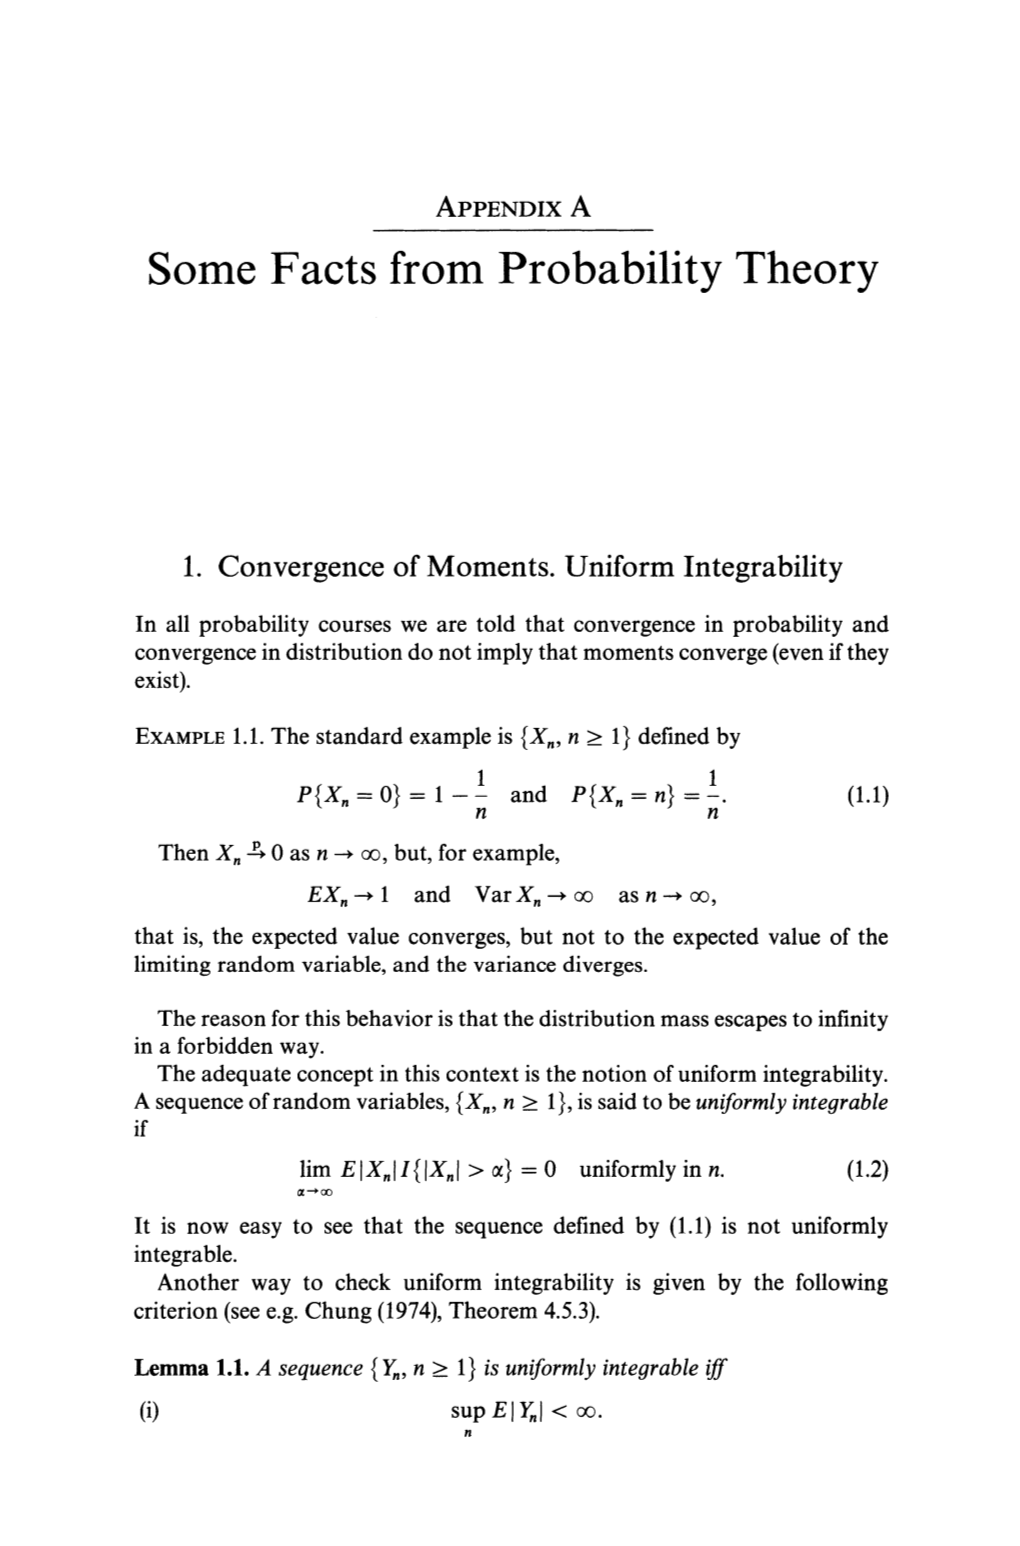 Some Facts from Probability Theory